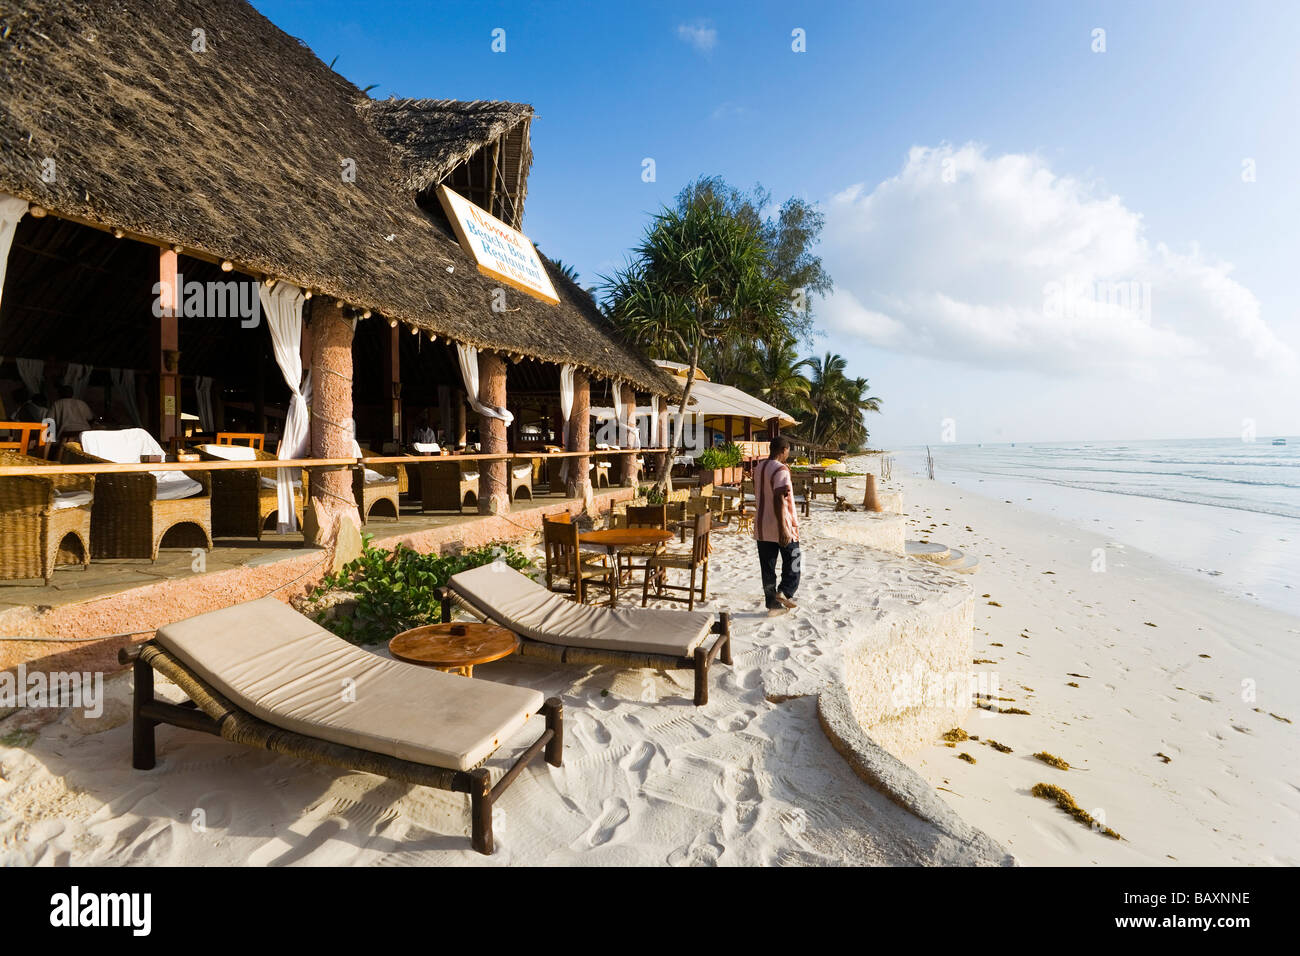 Beach restaurant with sunloungers at beach, The Sands, at Nomad, Diani Beach, Kenya Stock Photo